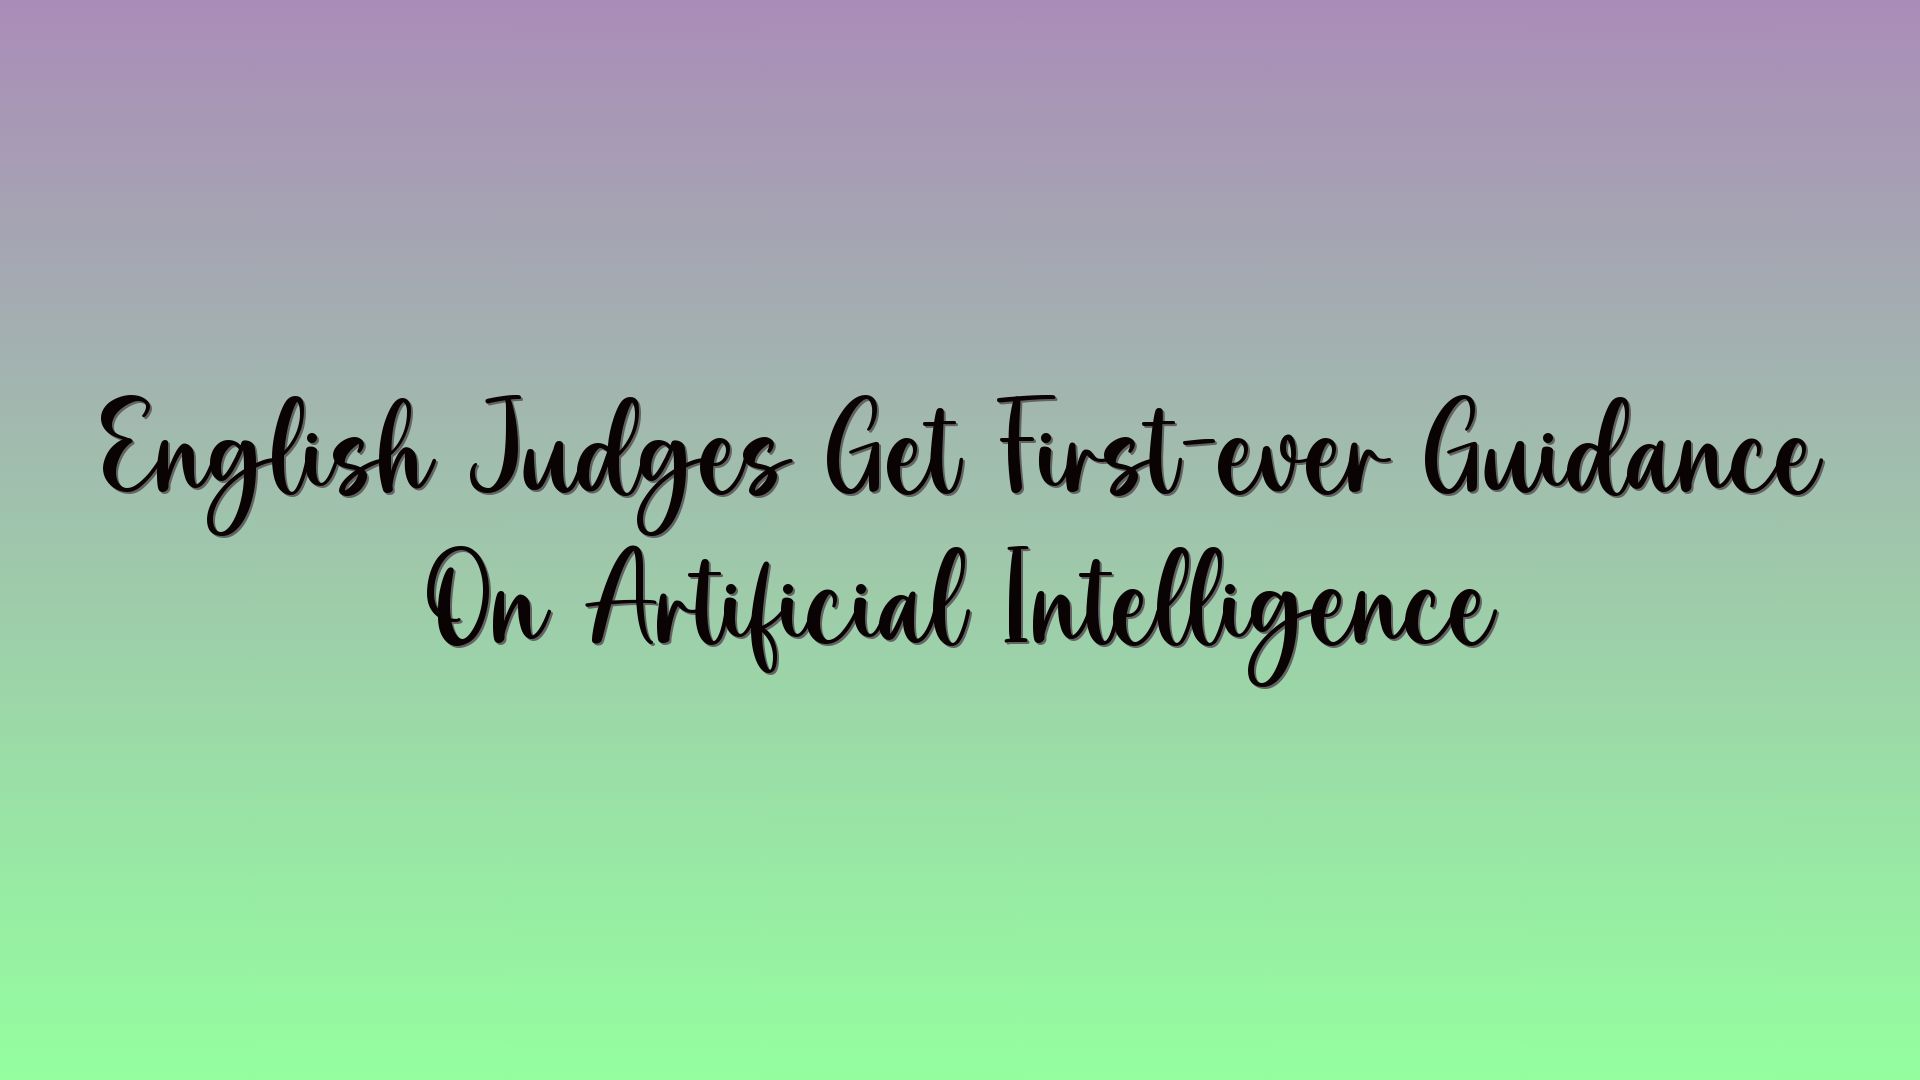 English Judges Get First-ever Guidance On Artificial Intelligence